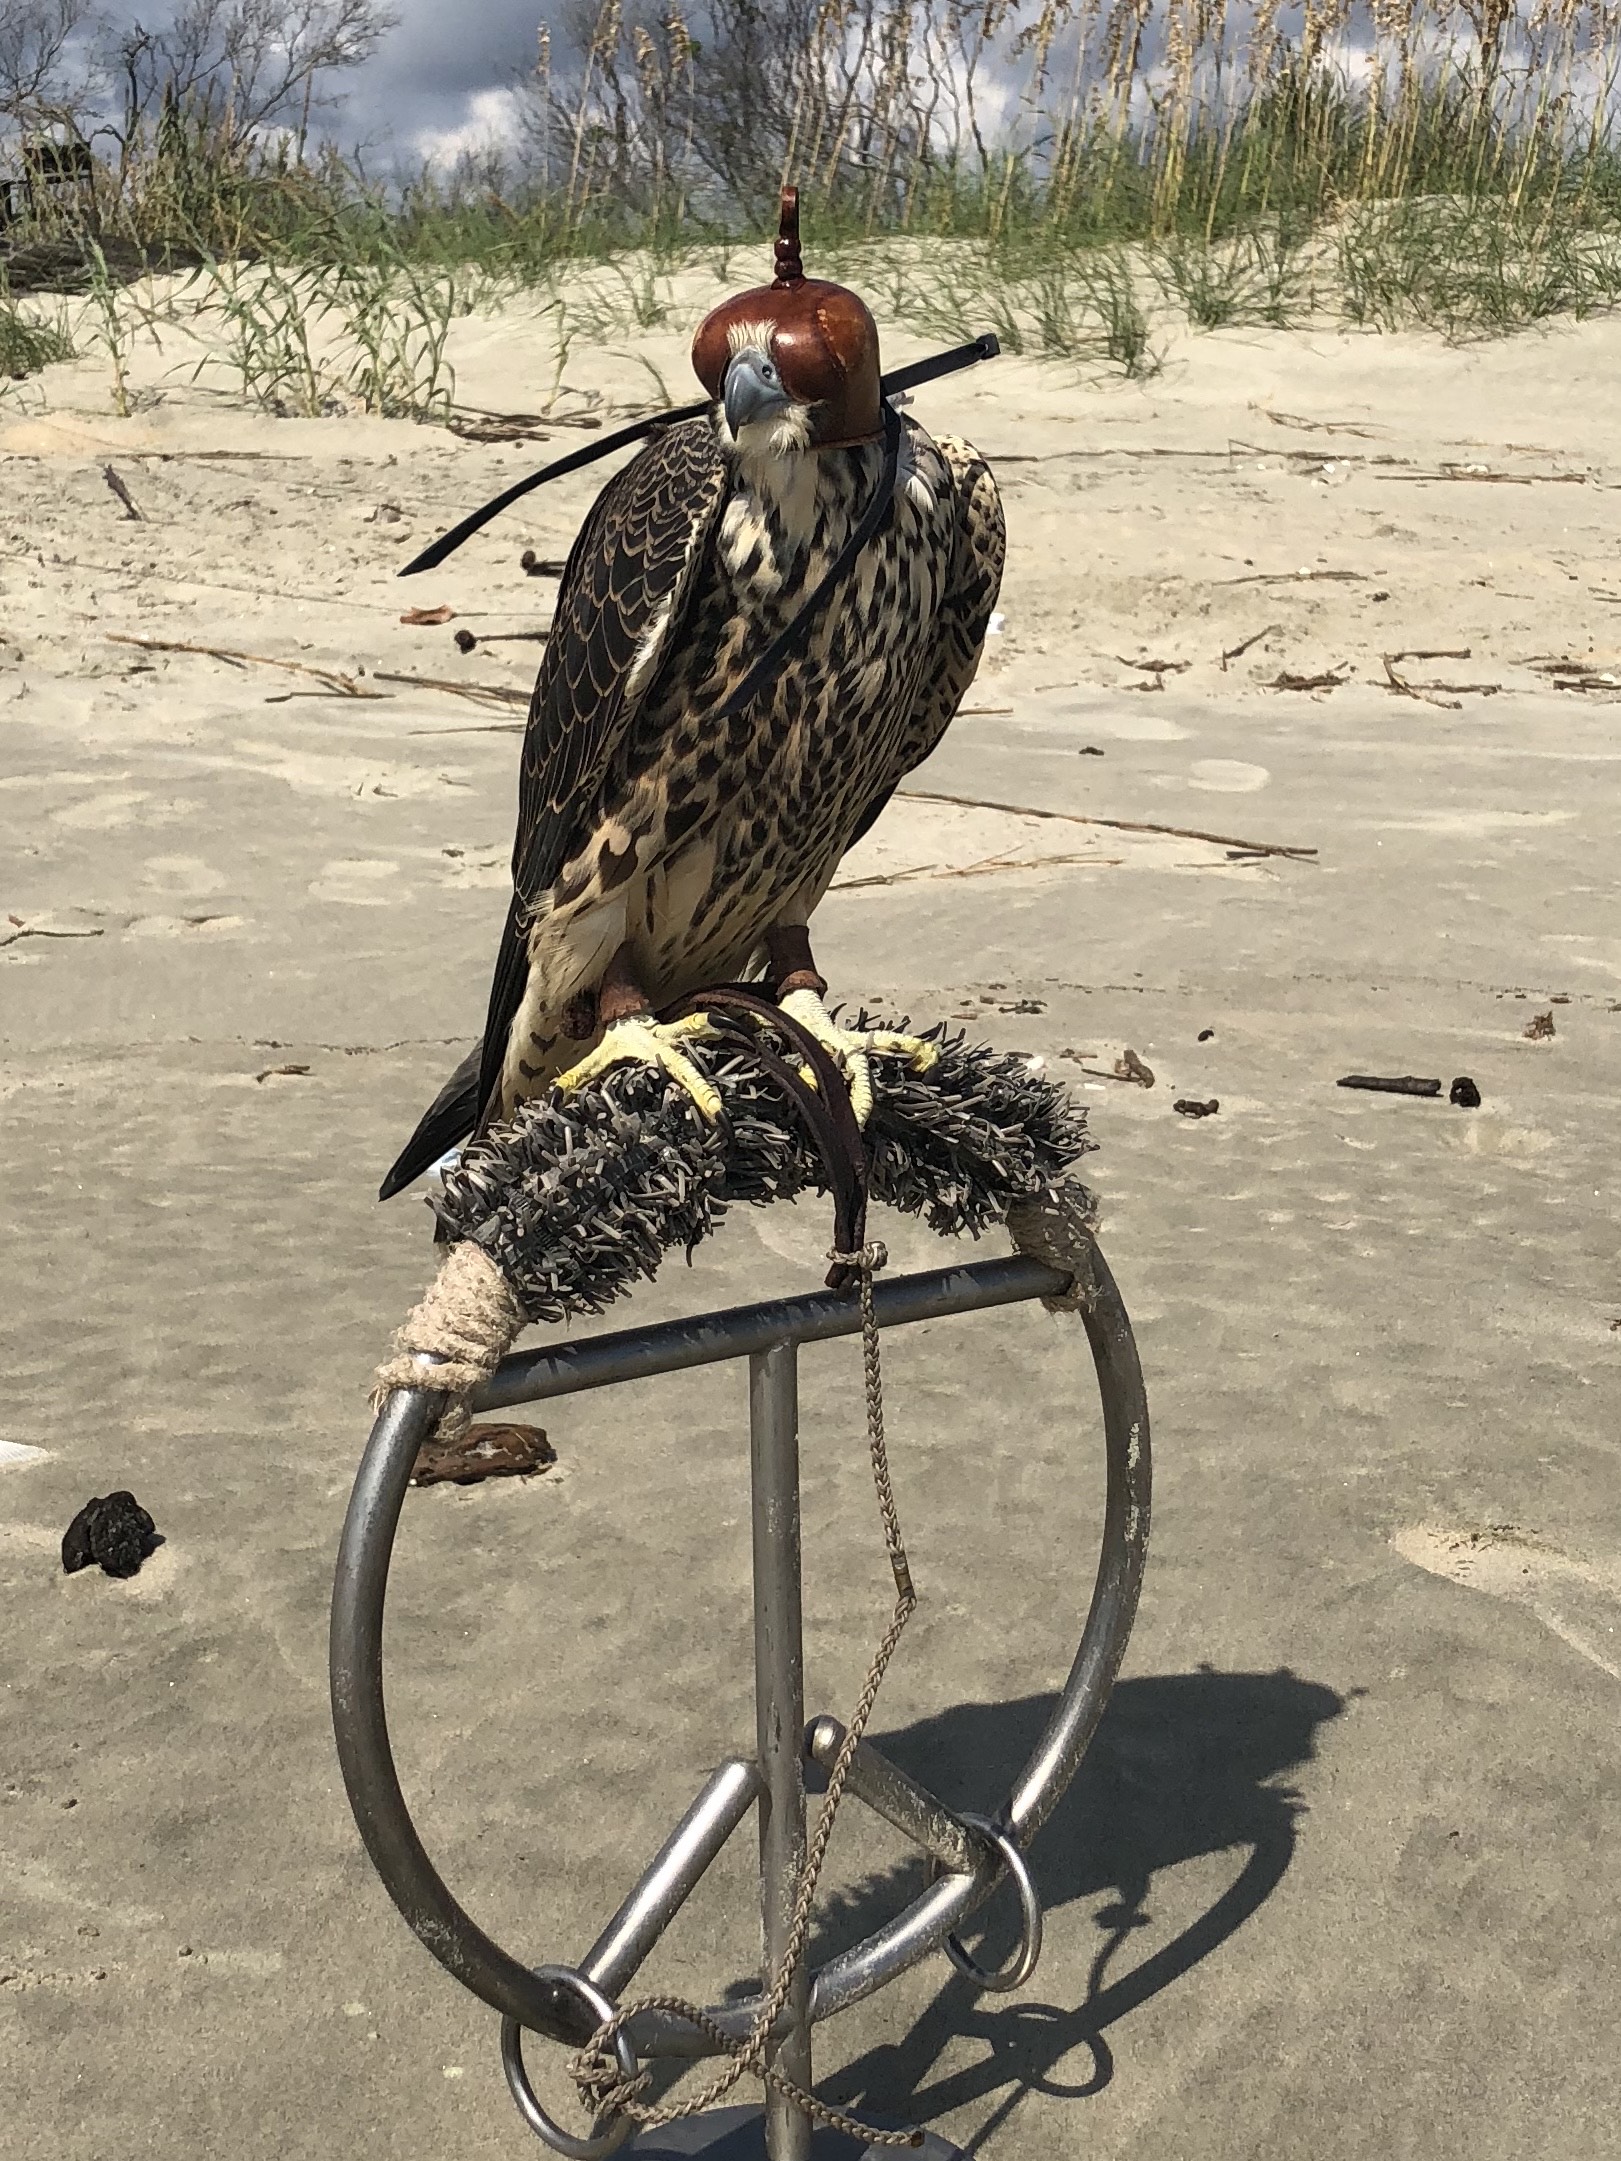 Peregrine falcons migrate along the South Carolina coast. Richard was with his sponsor, Chris Durham, when Chris trapped “Hillary” near Georgetown. Only a small number of peregrines are permitted annually to be captured in South Carolina. 
